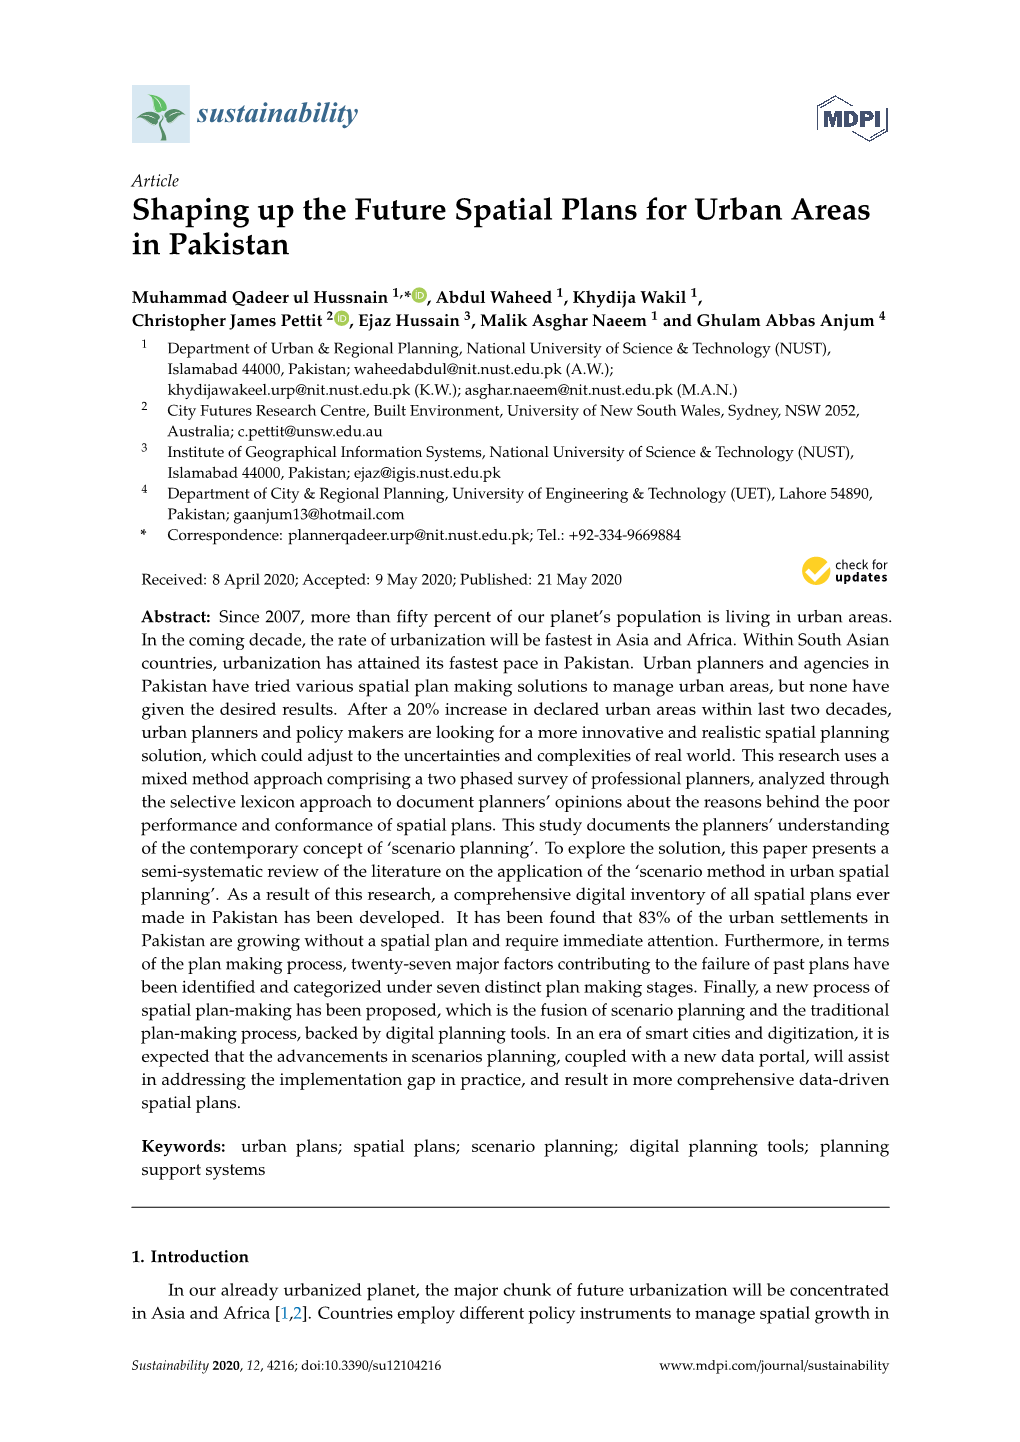 Shaping up the Future Spatial Plans for Urban Areas in Pakistan